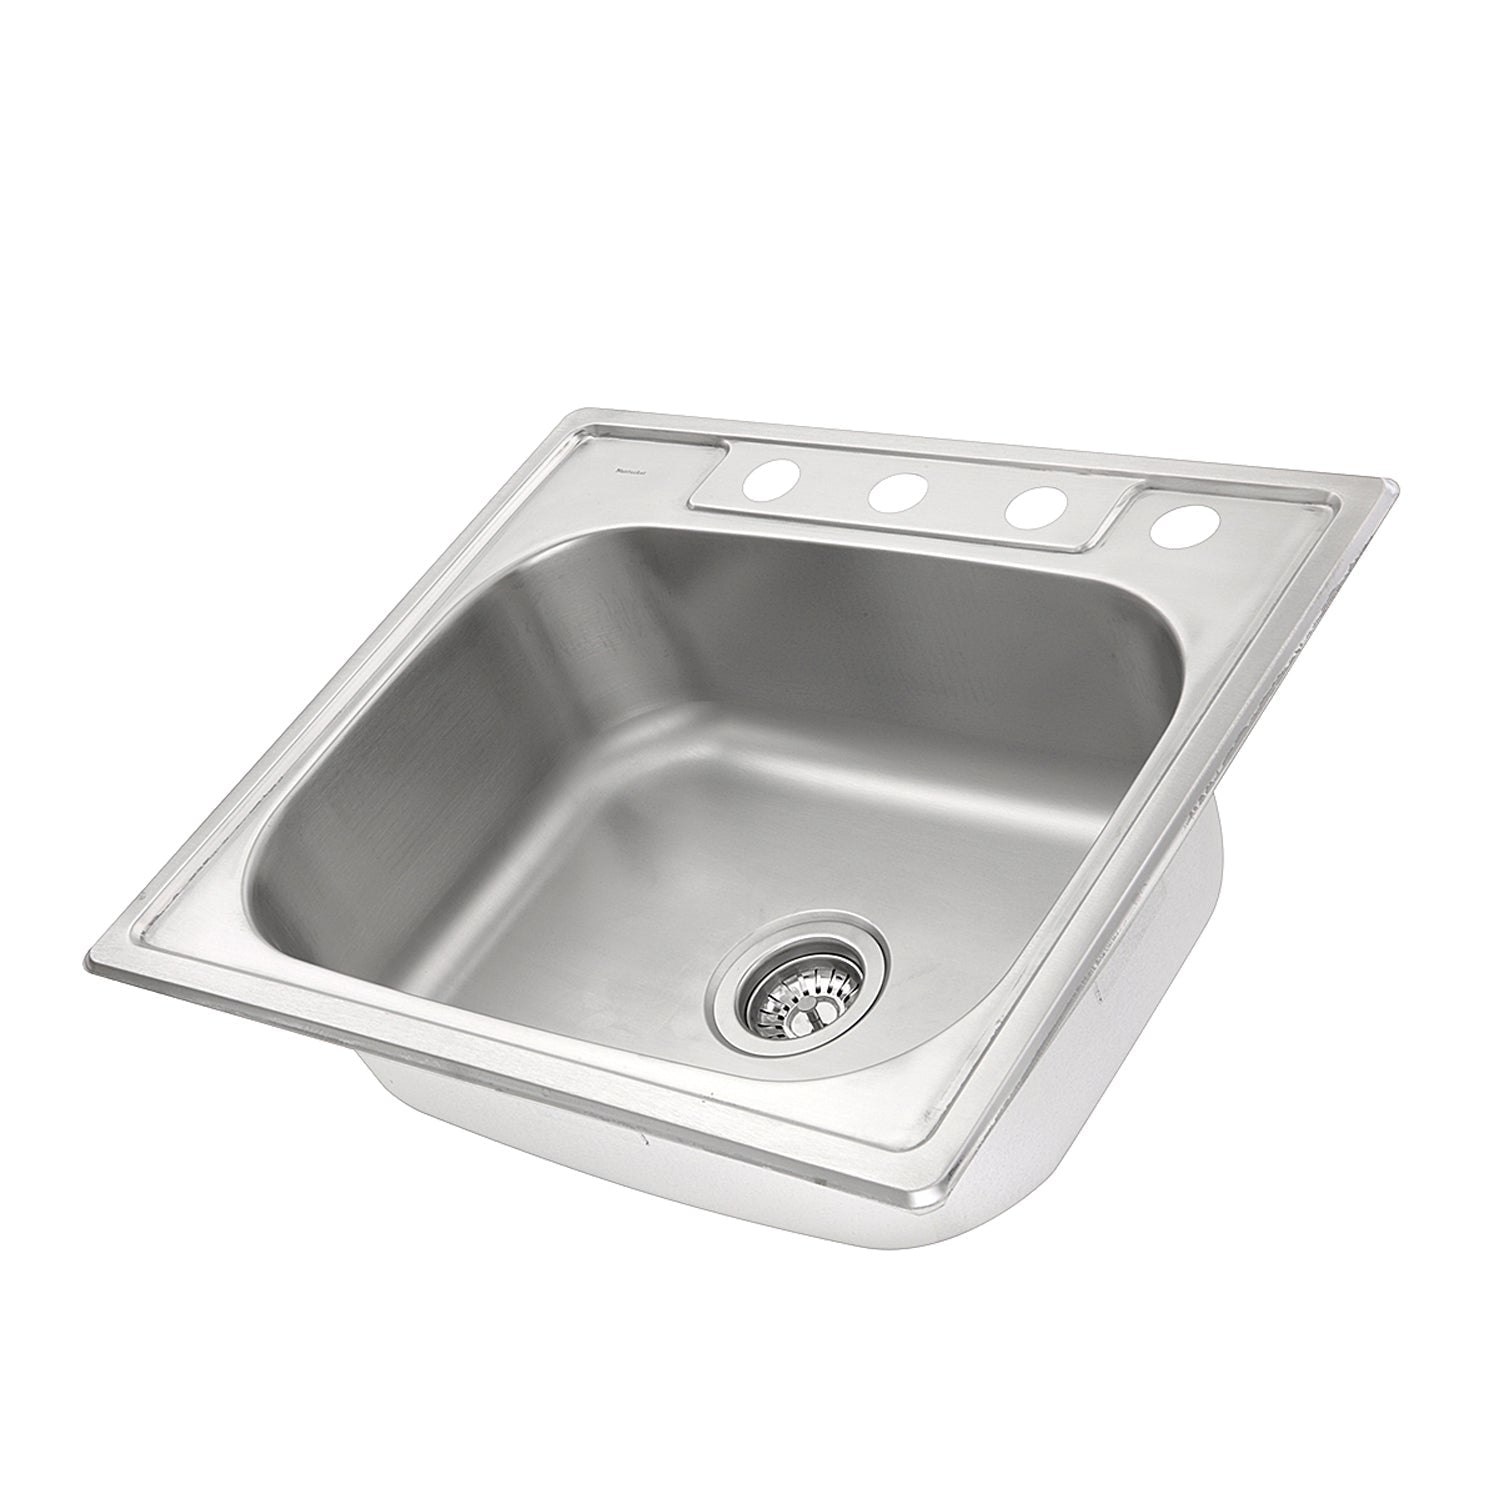 Nantucket Sinks NS2522-8 - 25" Small Rectangle Single Bowl Self Rimming Stainless Steel Drop in Kitchen Sink, 18 Gauge